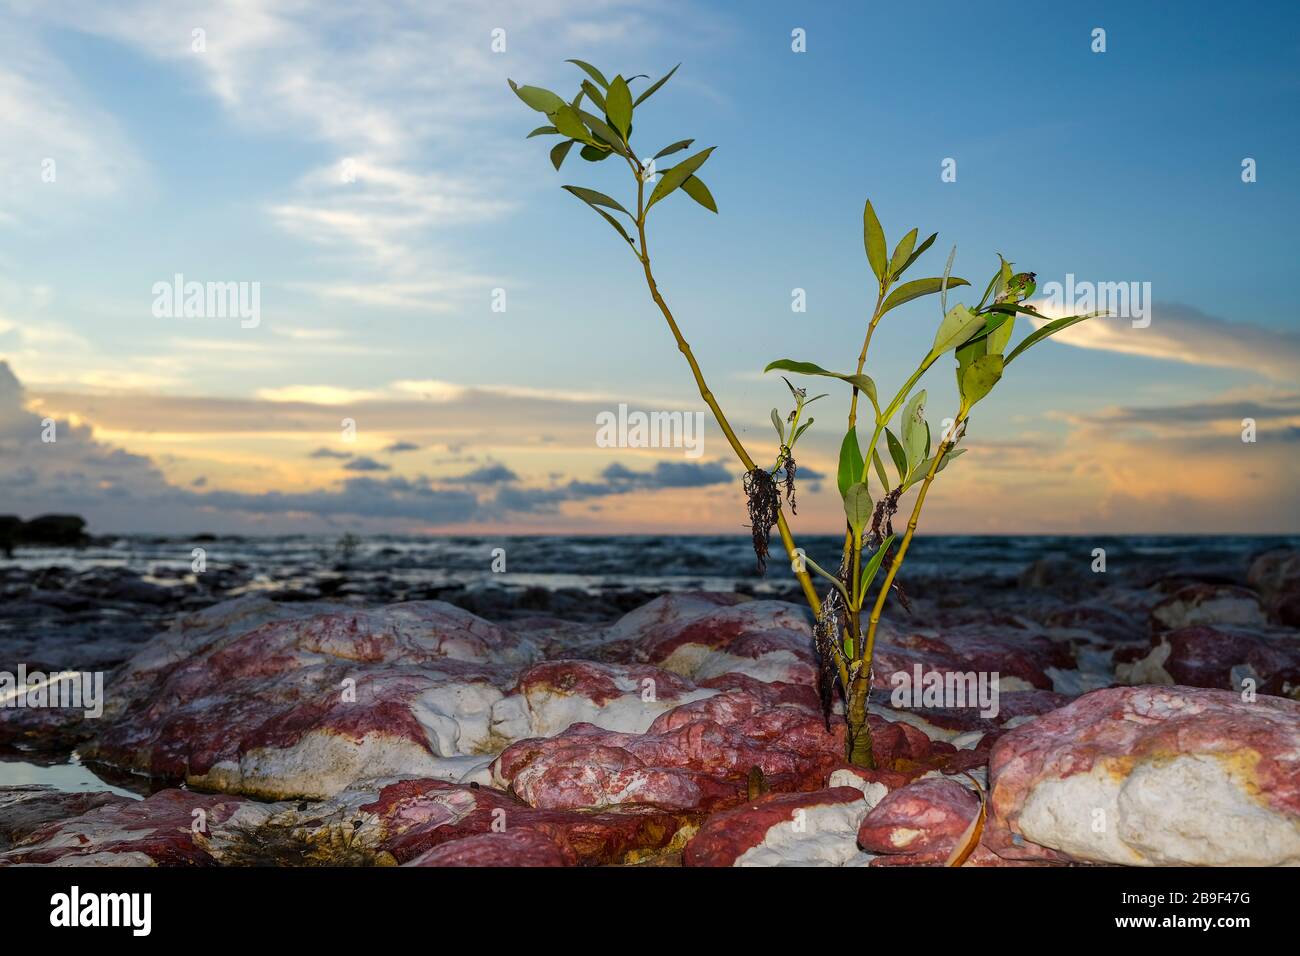 Young mangrove tree on the rocks of East Point Beach, in Darwin, Northern Territory, Australia. Stock Photo